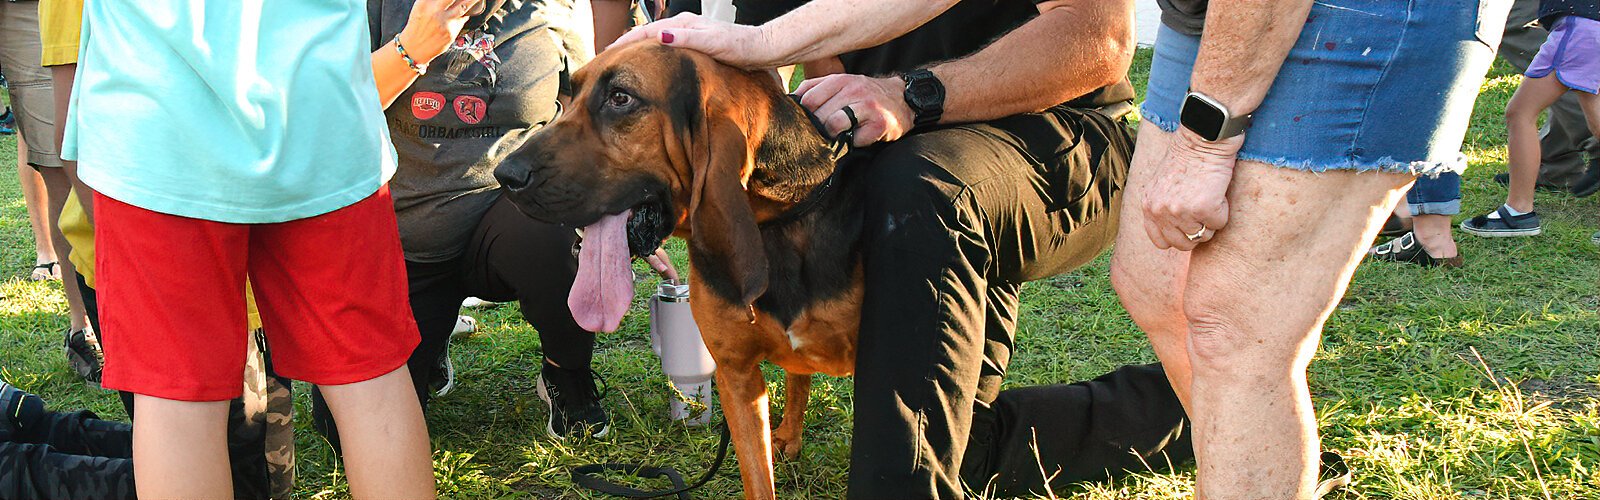 Attendees interact with K-9 Holmes, a bloodhound with a powerful sense of smell that helps police track lost people.